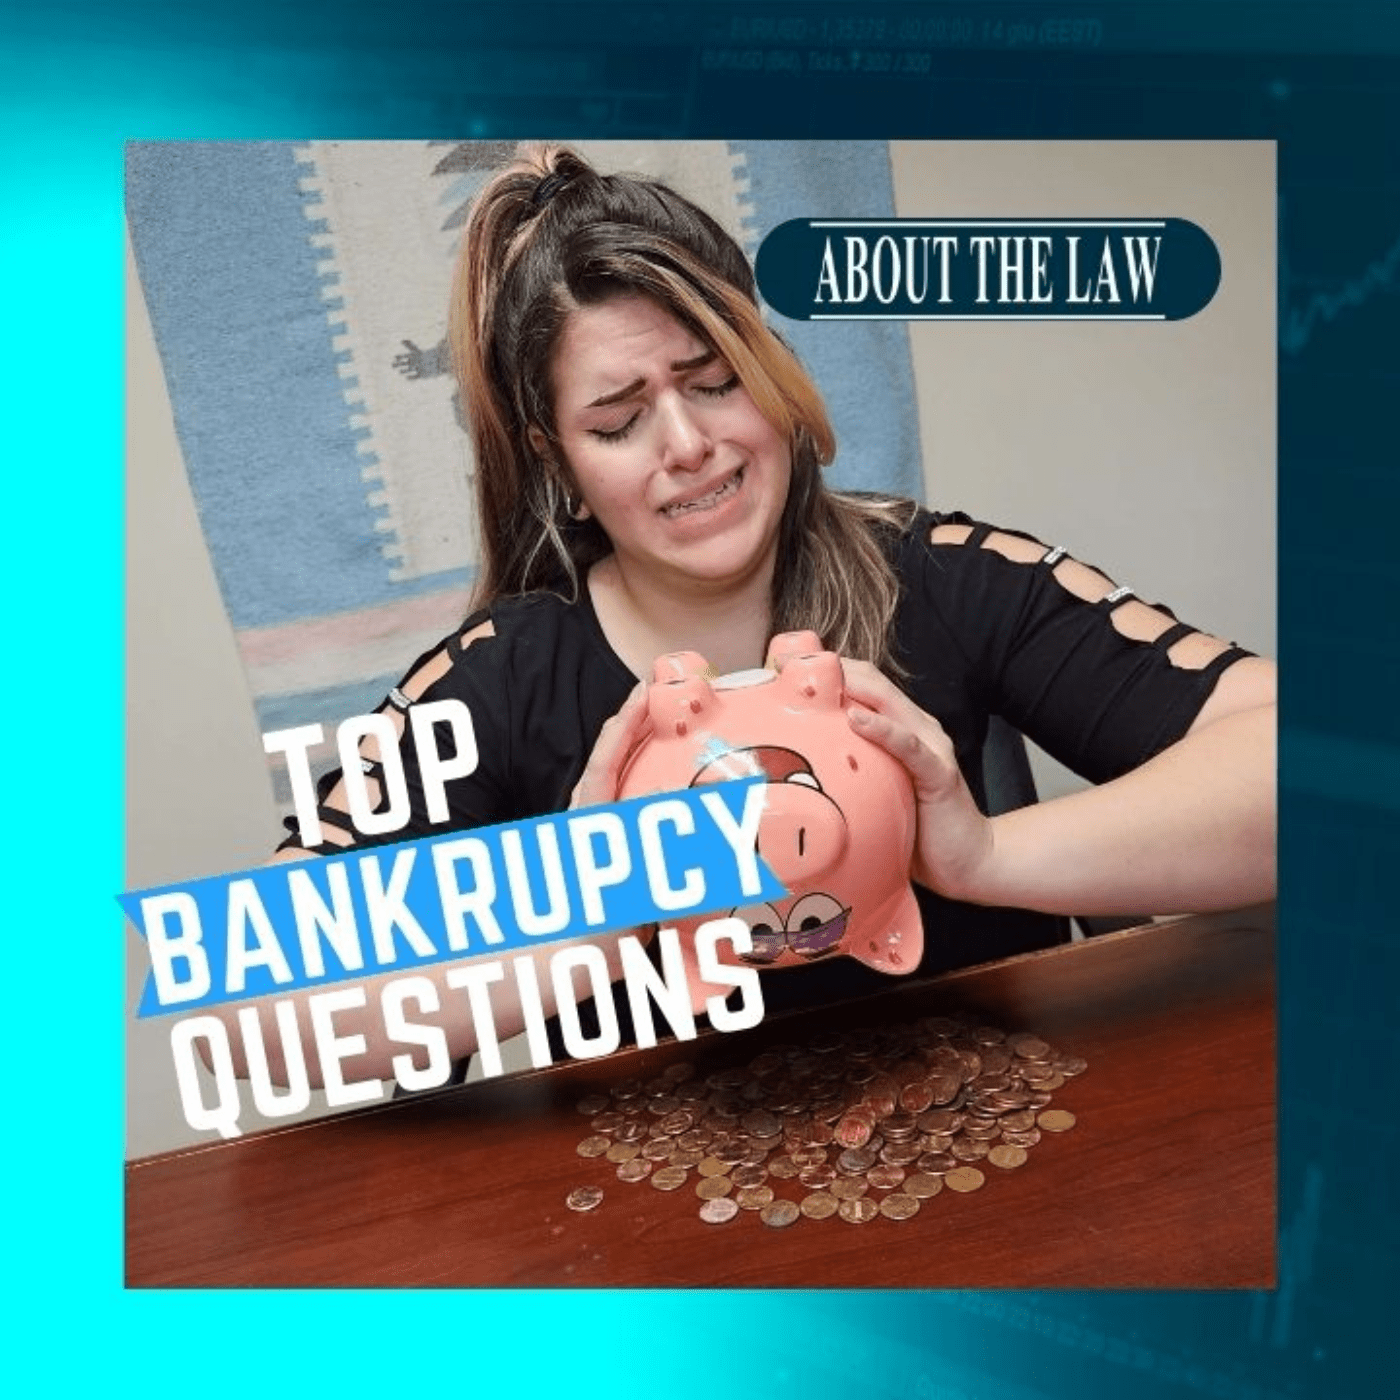 "top bankruptcy questions" over someone struggling with a piggy bank